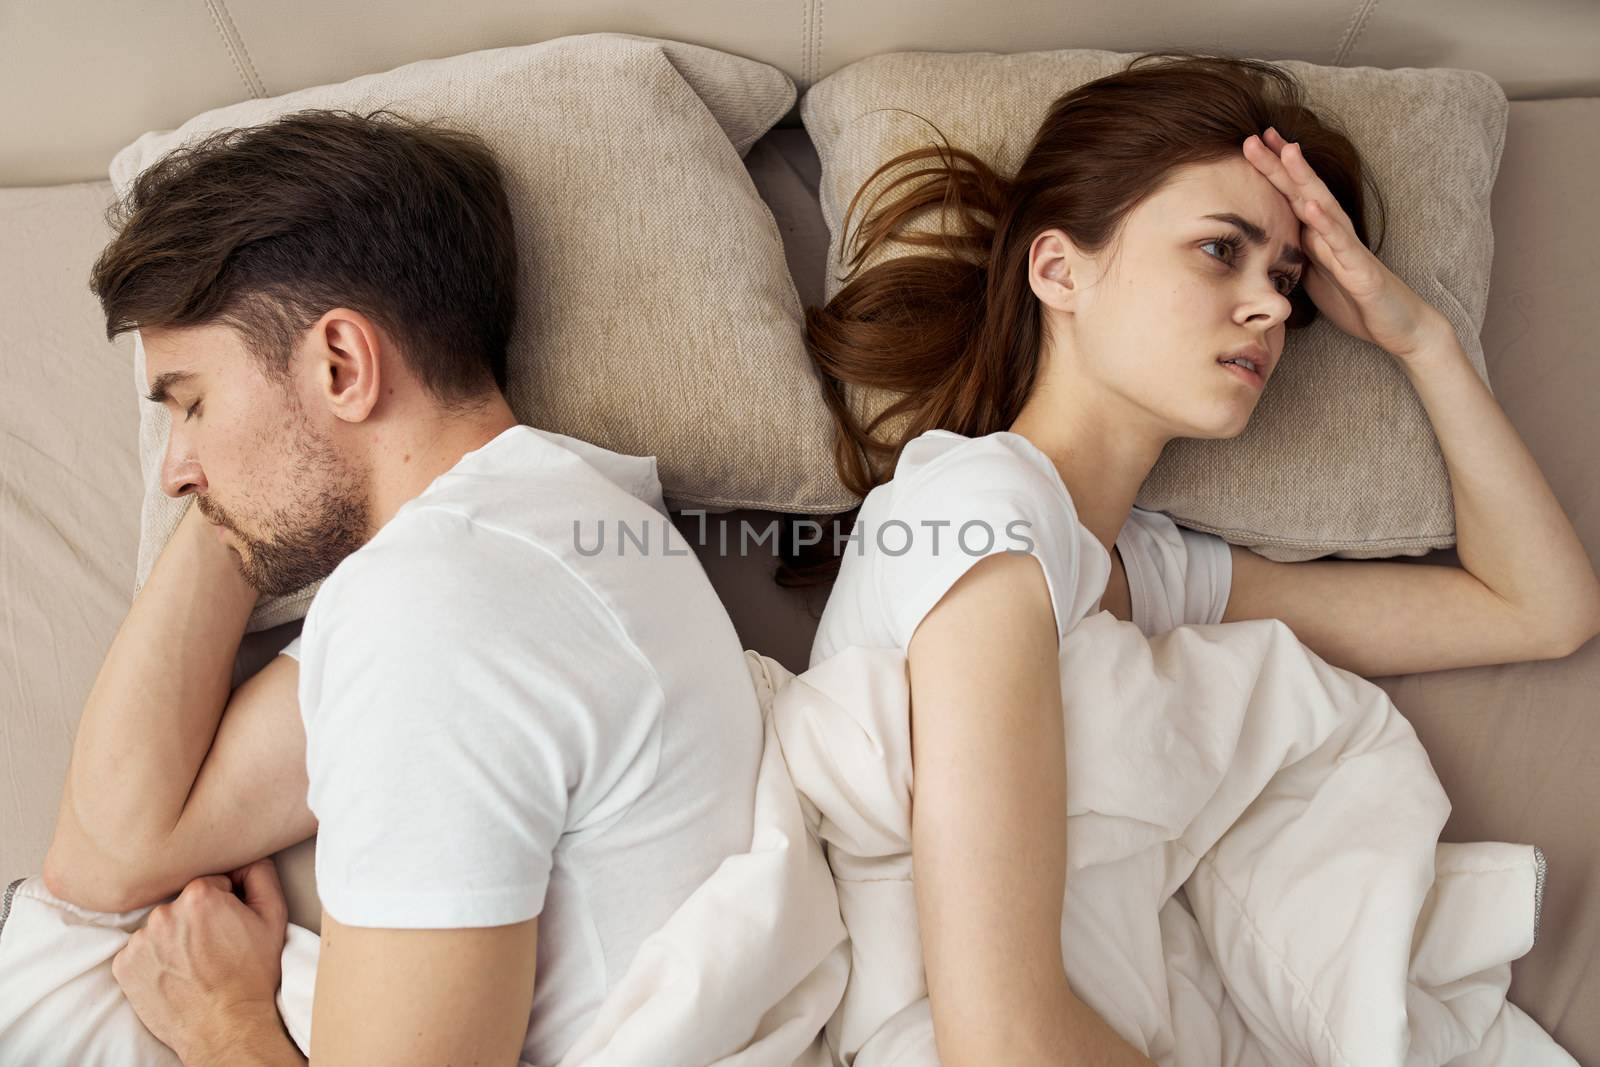 An upset woman lies in bed and the man next to her has problems in the family